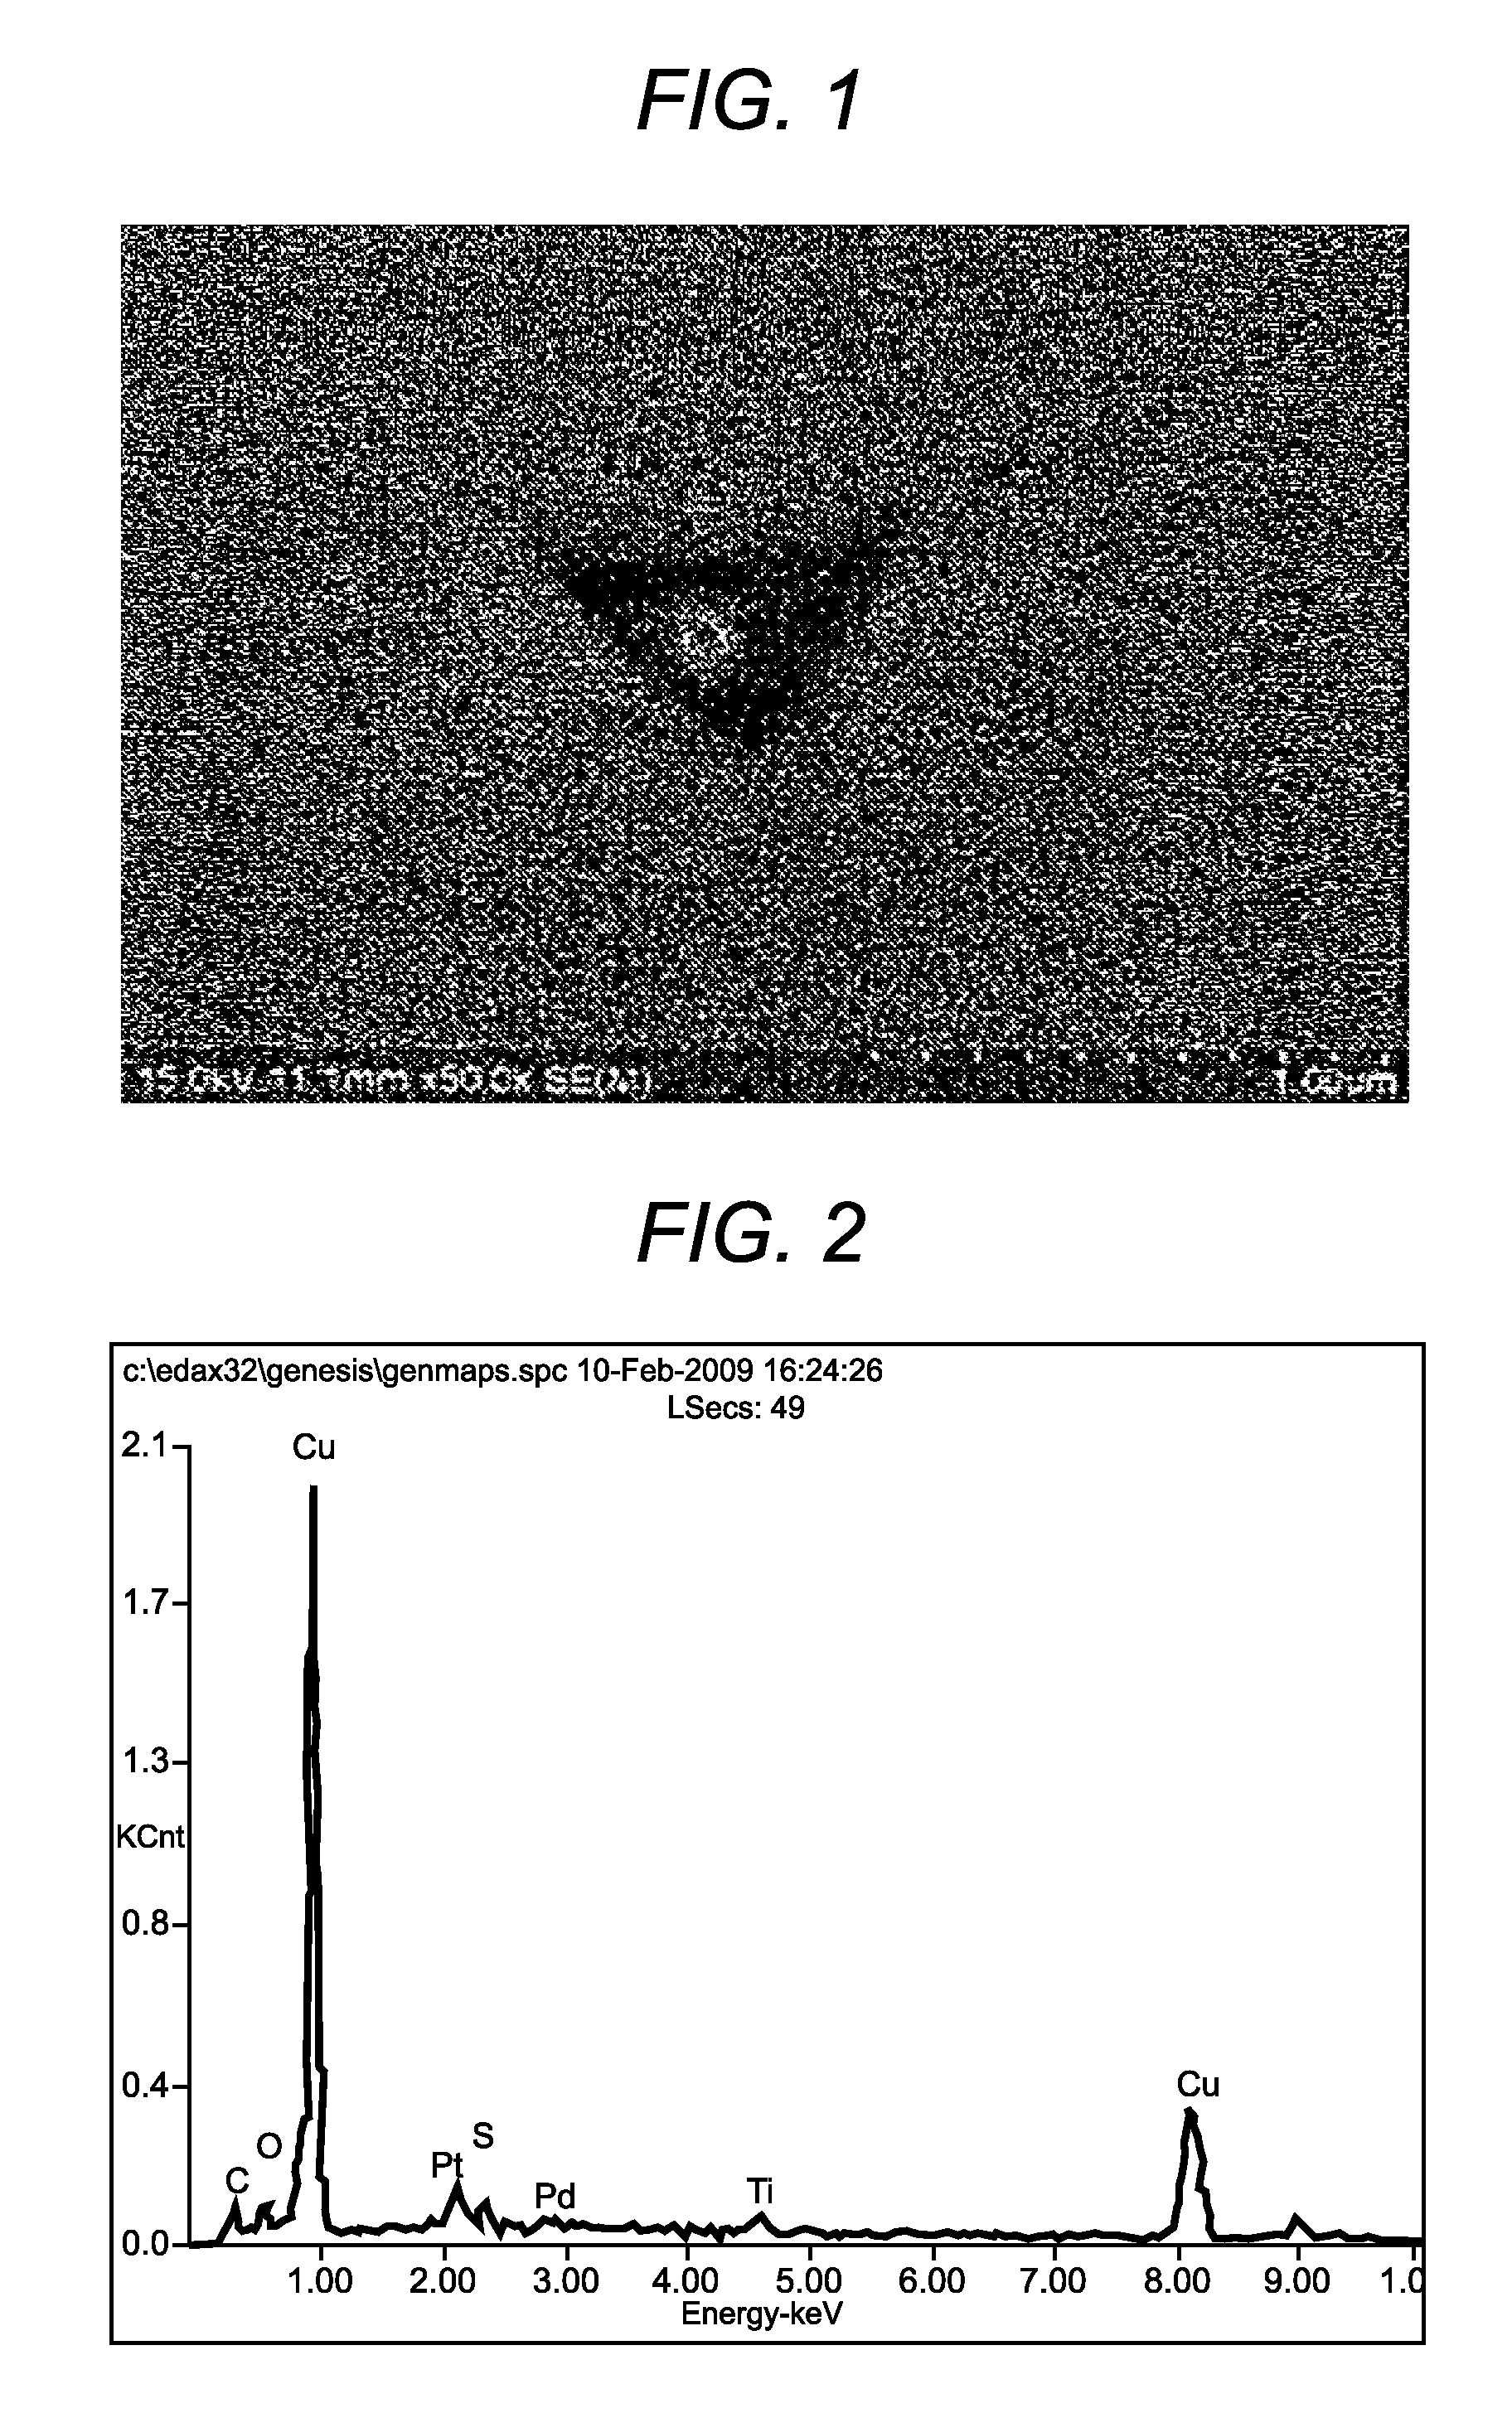 Flexible flat cable and method of manufacturing the same